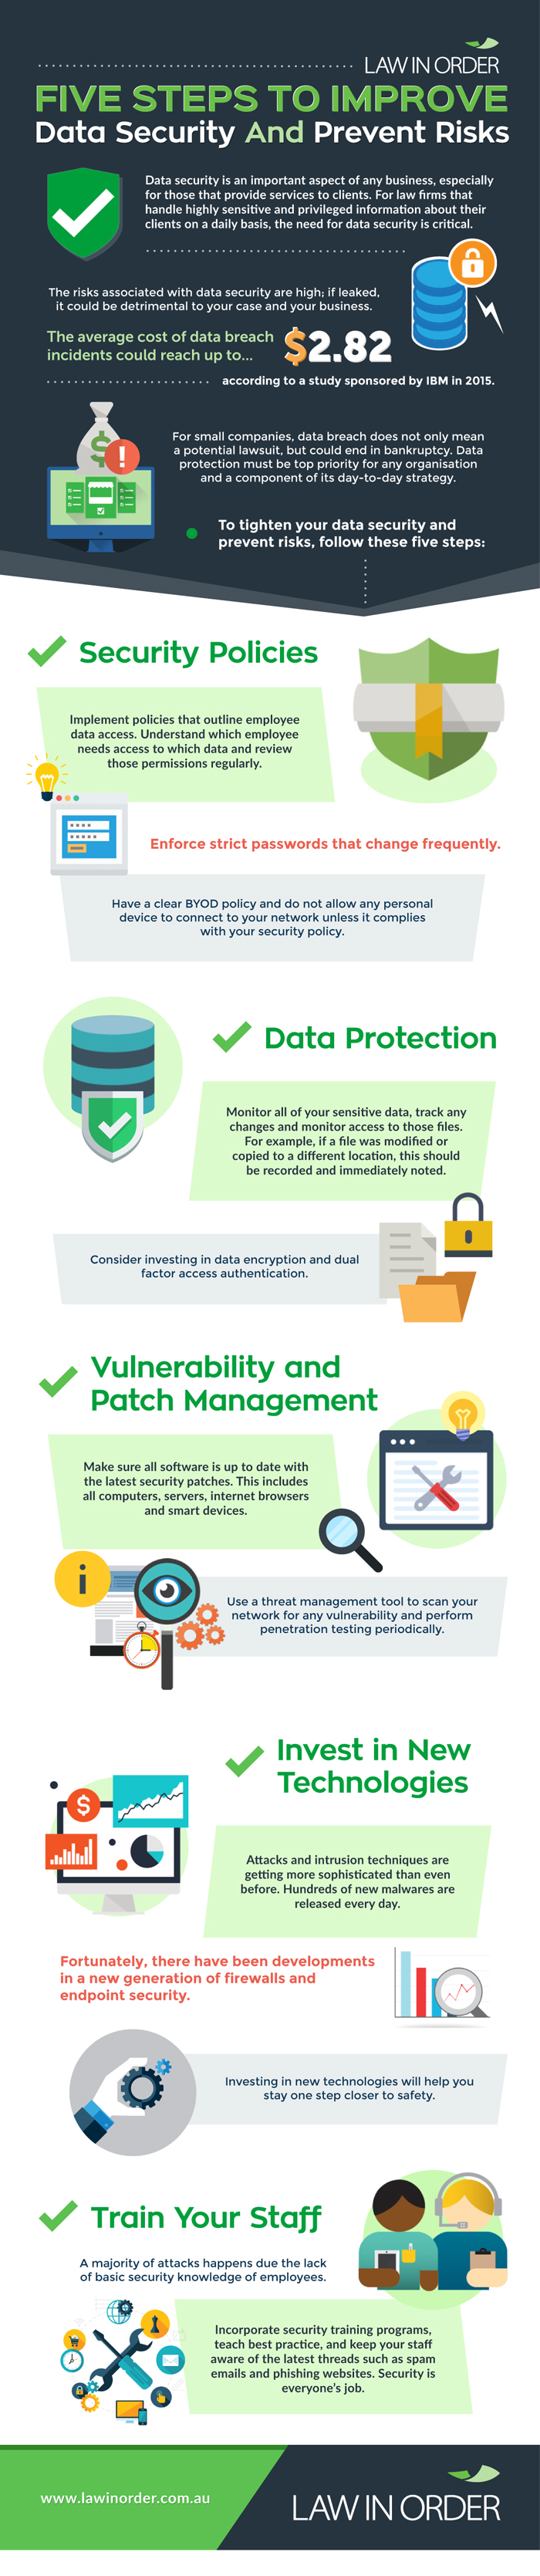 Five-Steps-To-Improve-Data-Security-And-Prevent-Risks.jpg